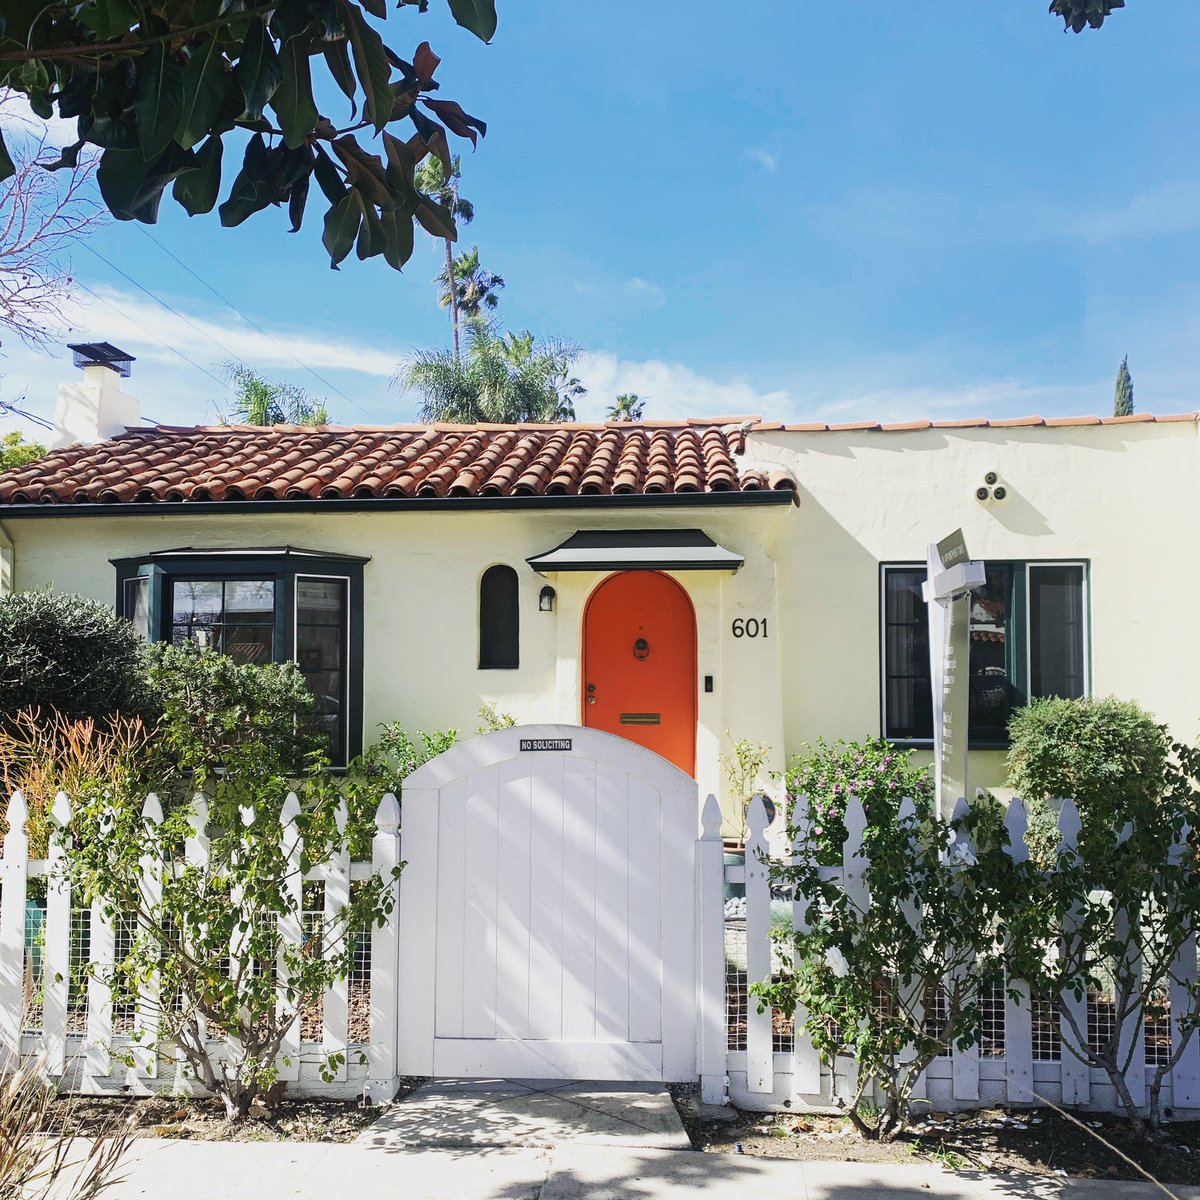 Sunday Showings - 1920s bungalow moments from Melrose, The Grove and Beverly Center - $1.1MM. DM me for more info! 
.
.
.
#realestate #losangeles #firsttimehomebuyer #california #californialove #realestateagent #homemade #milliondollarhome #milliondollarlisting #sellingsunset